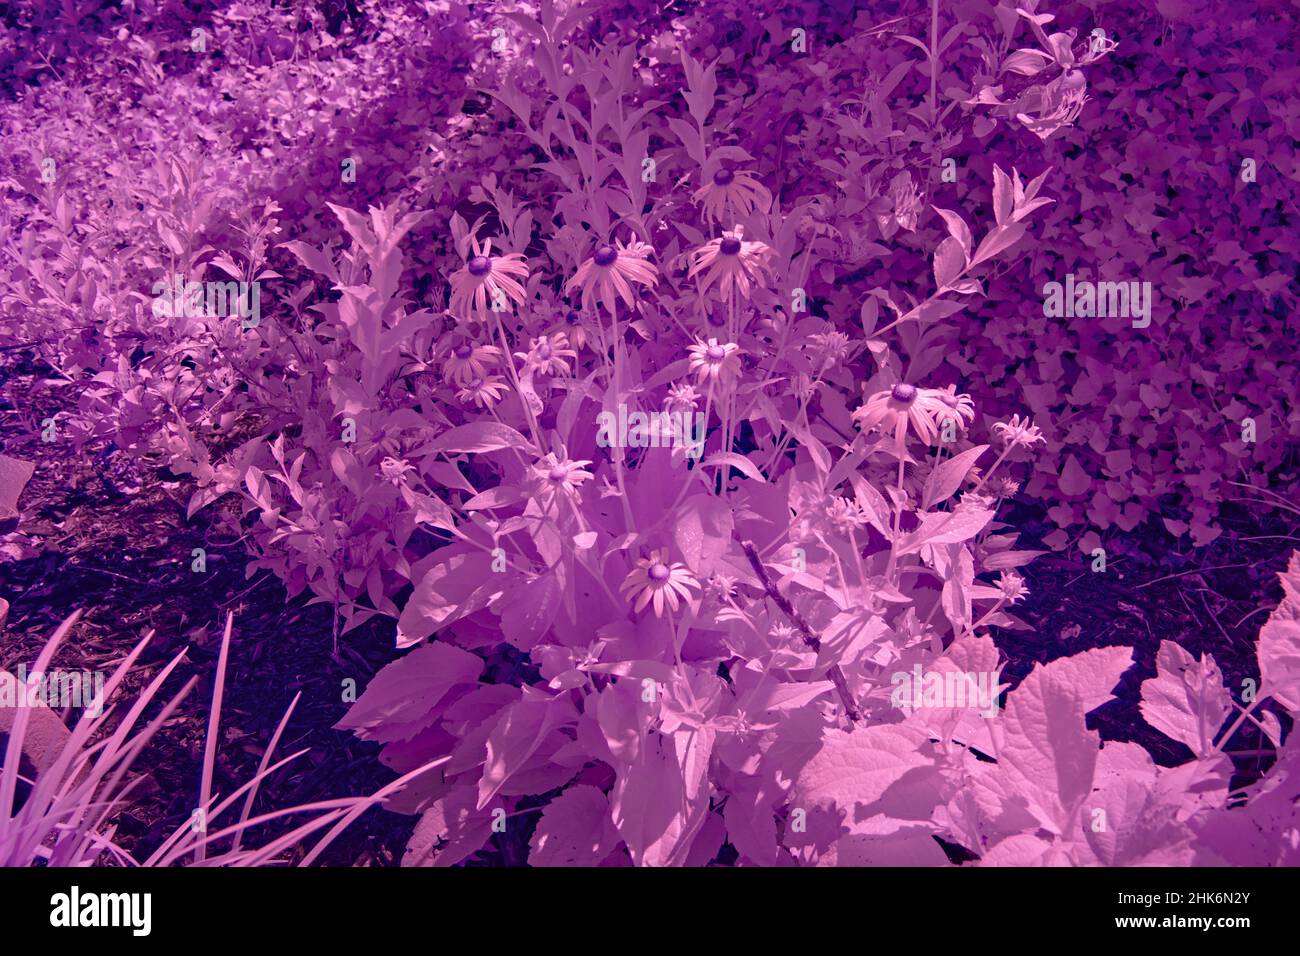 A Black Eyed Susan flower garden. This photo was photographed in Infrared to make the flowers appear purple. Stock Photo